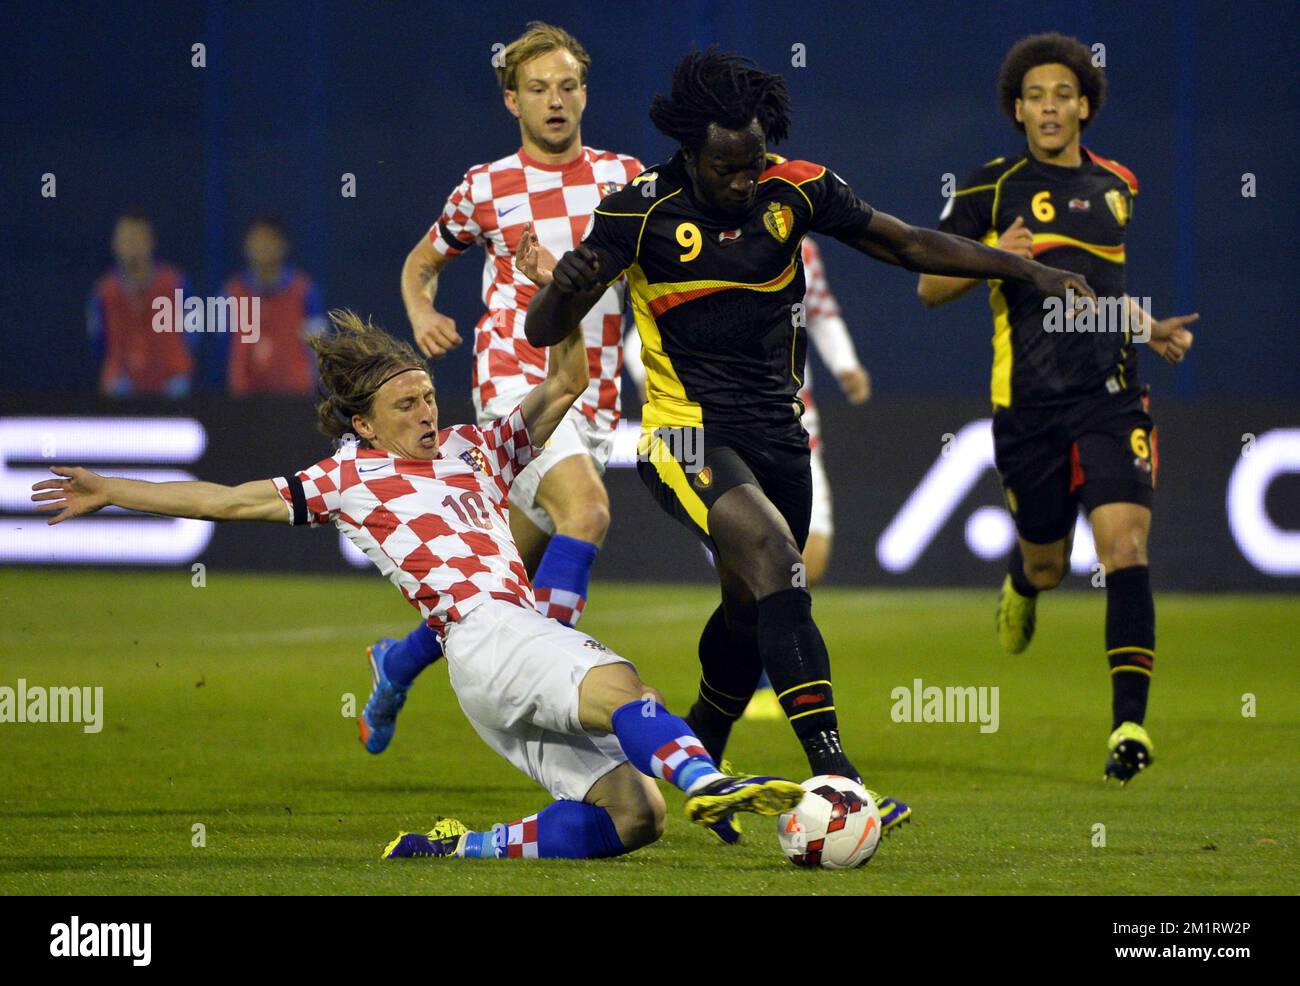 20131011 - ZAGREB, CROATIA: Croatia's Luka Modric and Belgium's Romelu Lukaku fight for the ball during a soccer game between Belgian national team The Red Devils and the Croatian national team in the Maksimir stadium in Zagreb, Croatia, Friday 11 October 2013, a qualification game for the 2014 FIFA World Cup. With two games to play the Red Devils are leading group A, they need one more point to qualify for the World Cup as group winner. BELGA PHOTO ERIC LALMAND Stock Photo